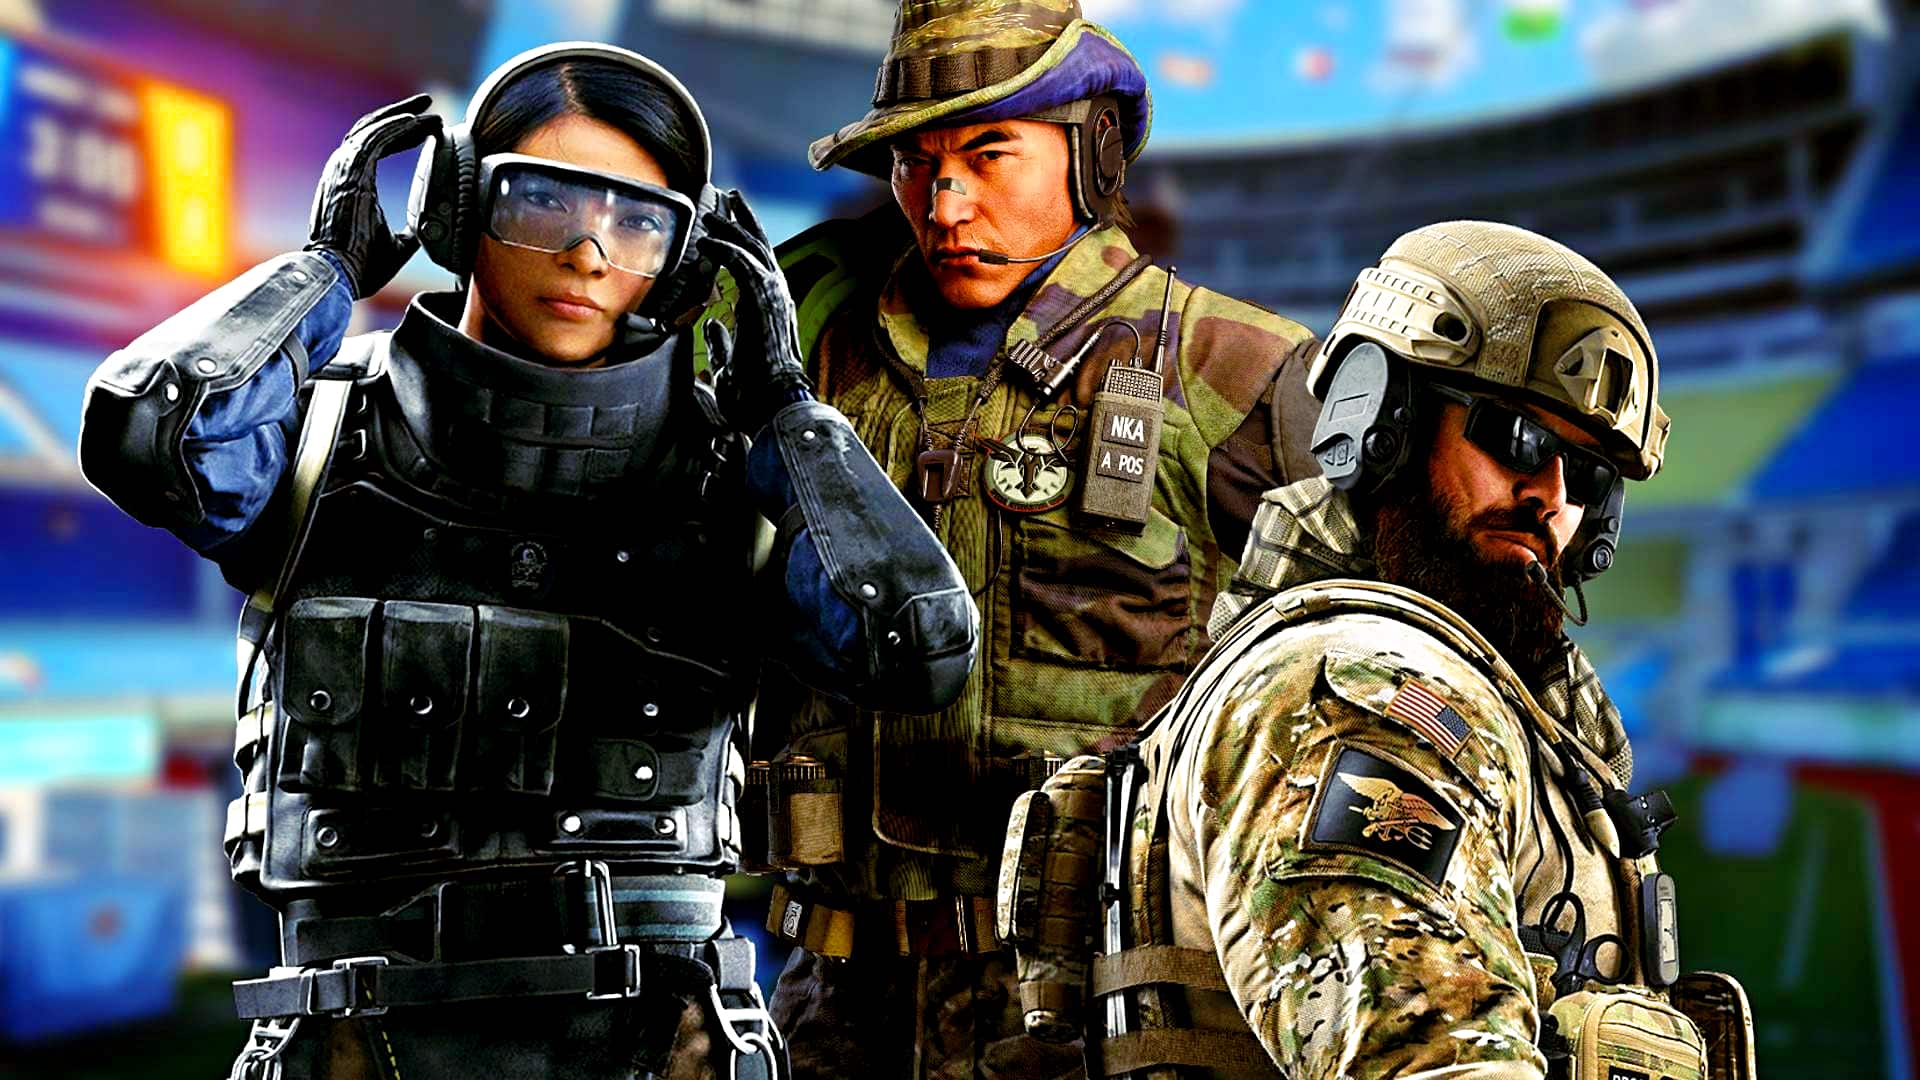 Rainbow Six Brutal Swarm – Year 7 Season 3 Updates, Patch Size, and More